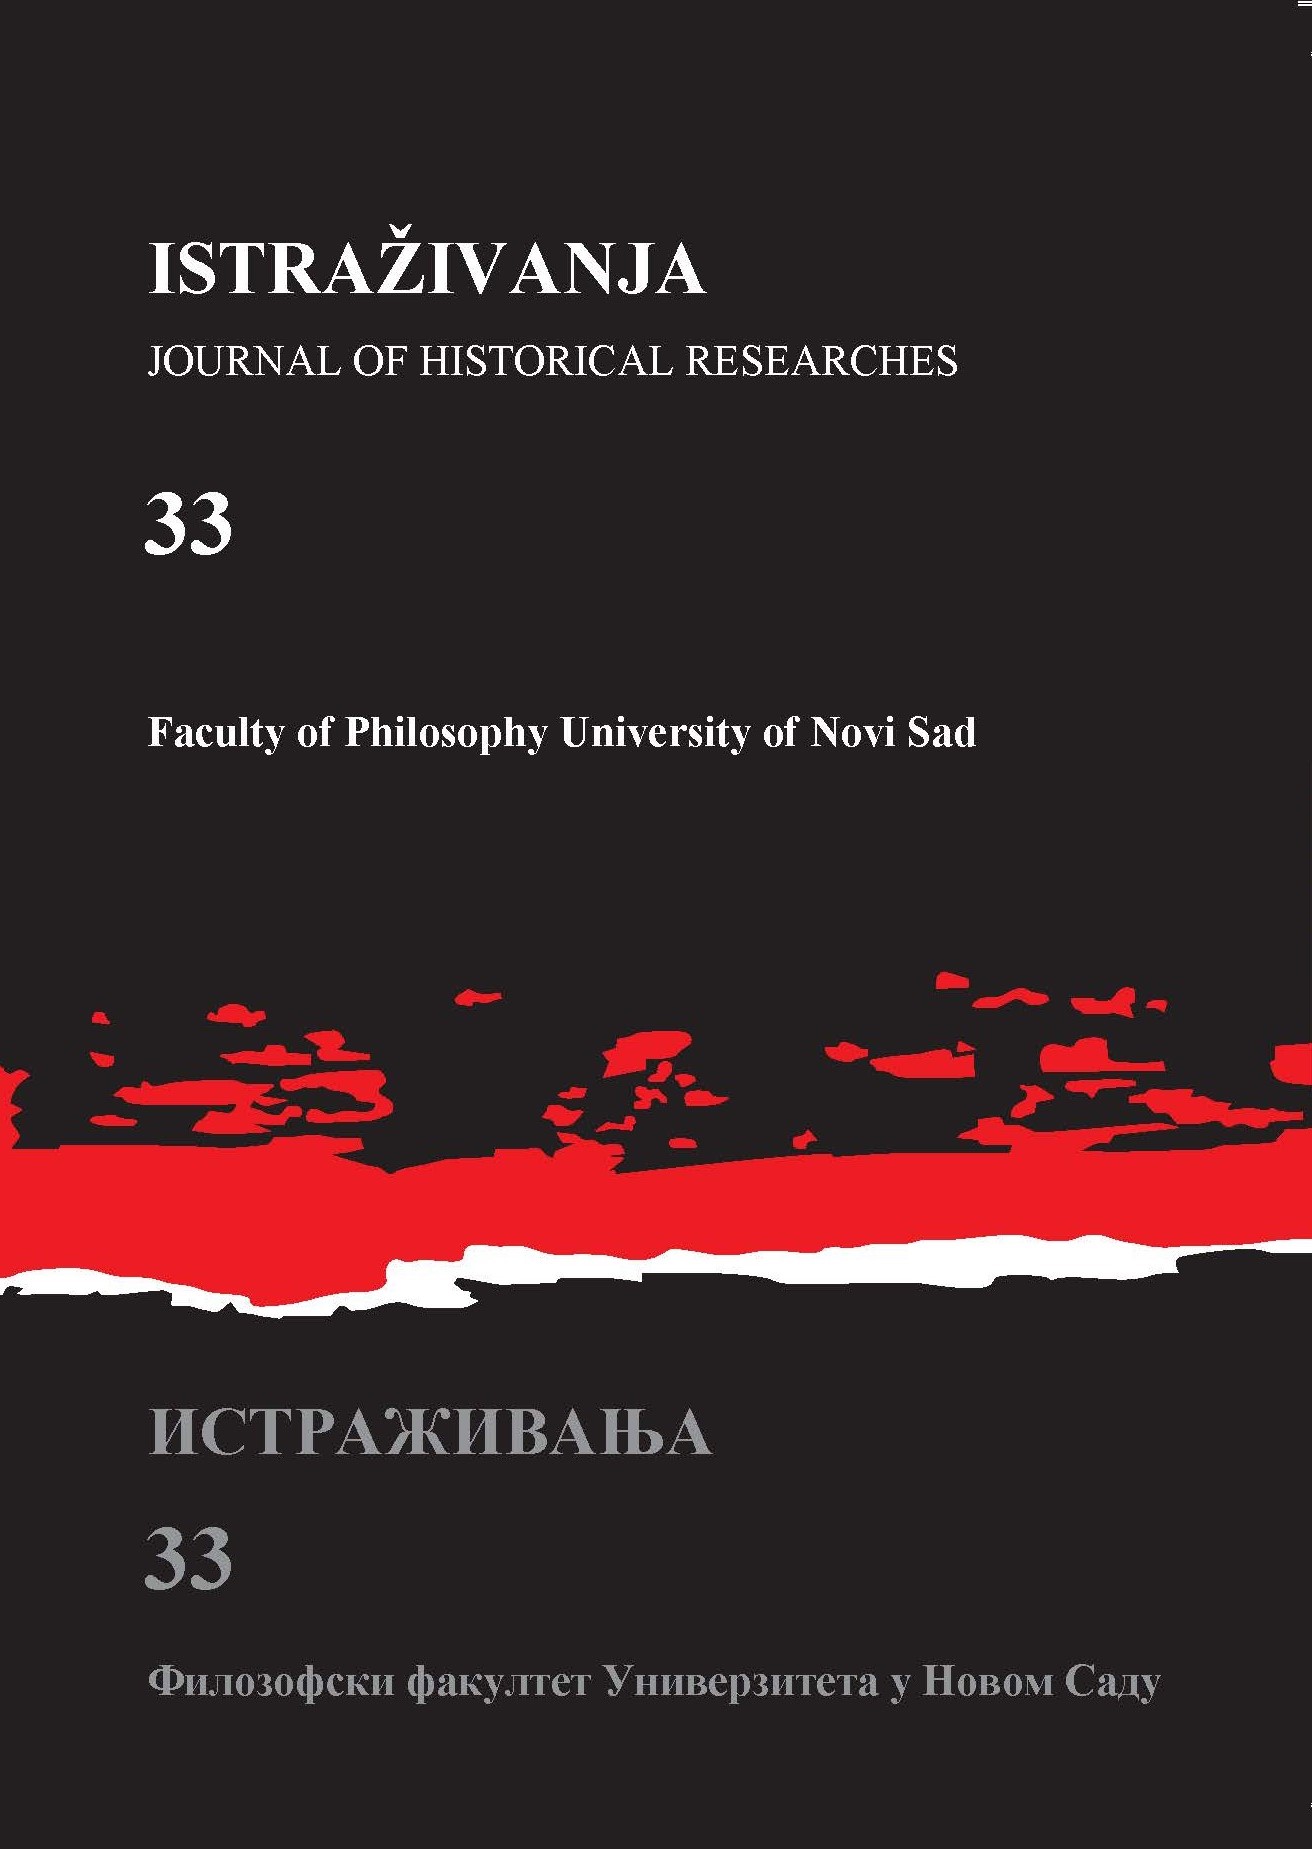 Aleksandra Ilić Rajković and Sanja Petrović Todosijević (eds.), What Would We Do Without School?!: Essays on the History of Education in Serbia and Yugoslavia from the 19th Century to the Present Day.